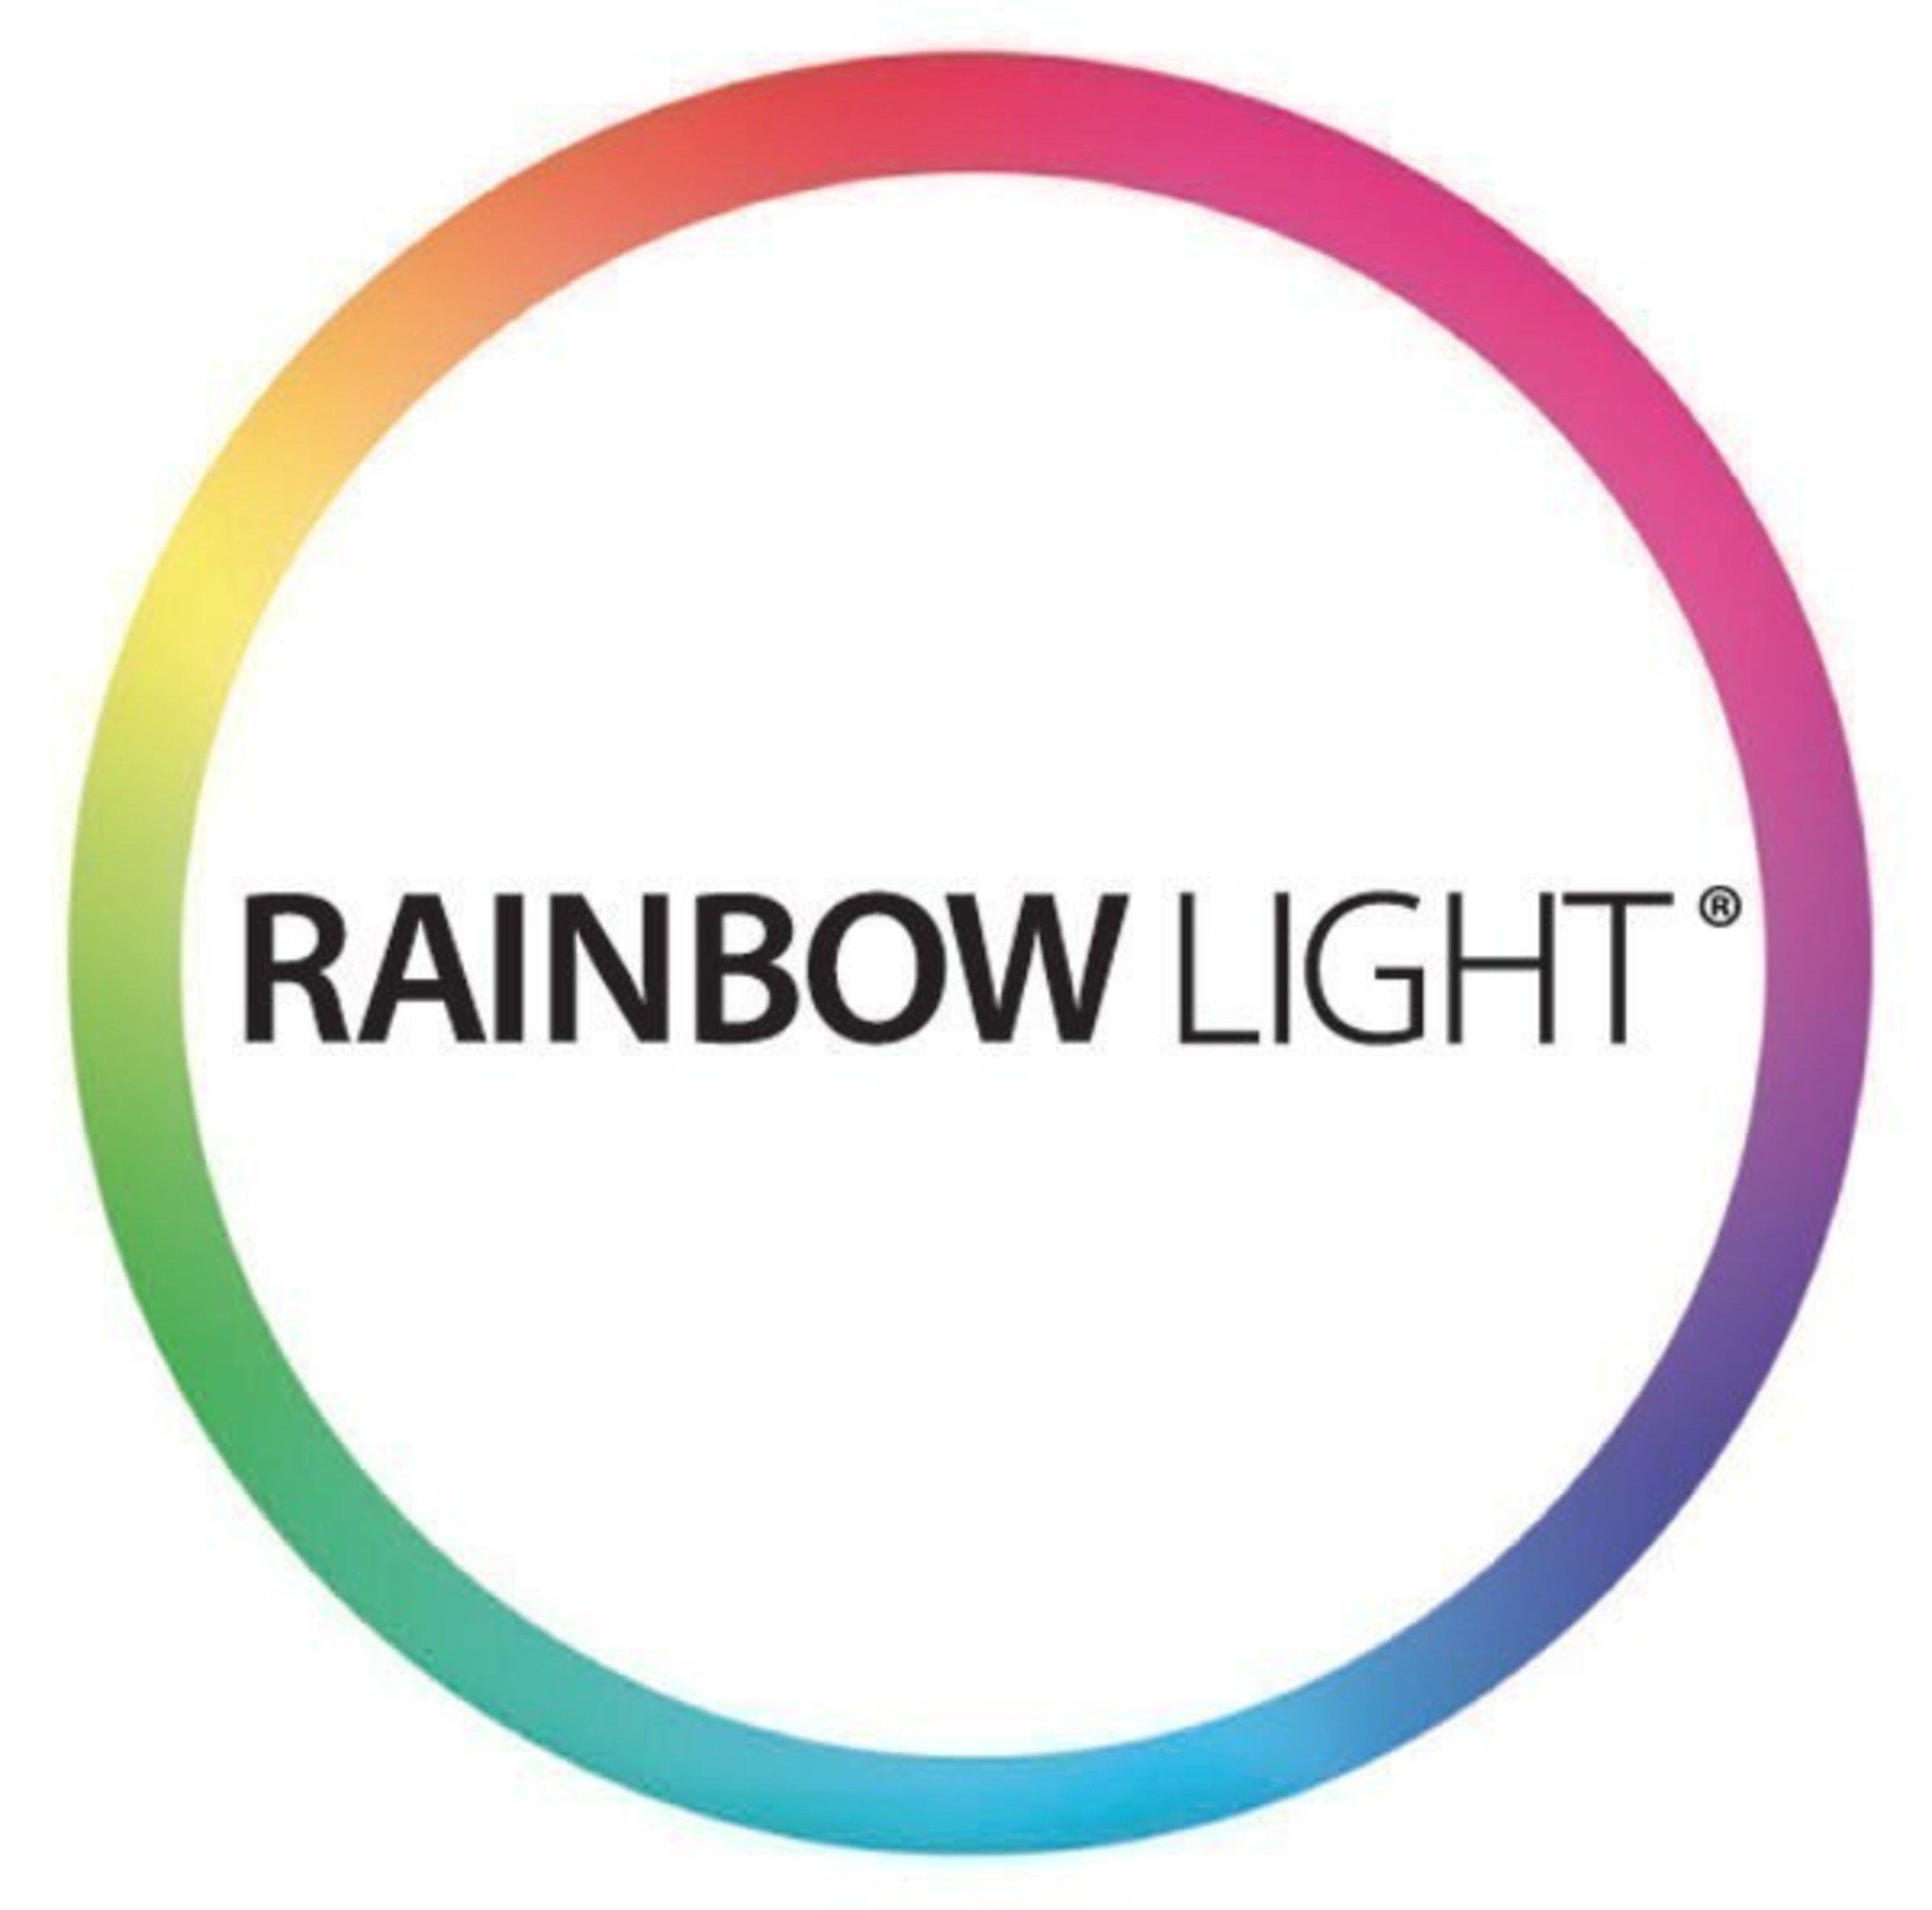 Rainbow Oval Logo - Rainbow Light Launches Global Path to EcoGuard Campaign to Address